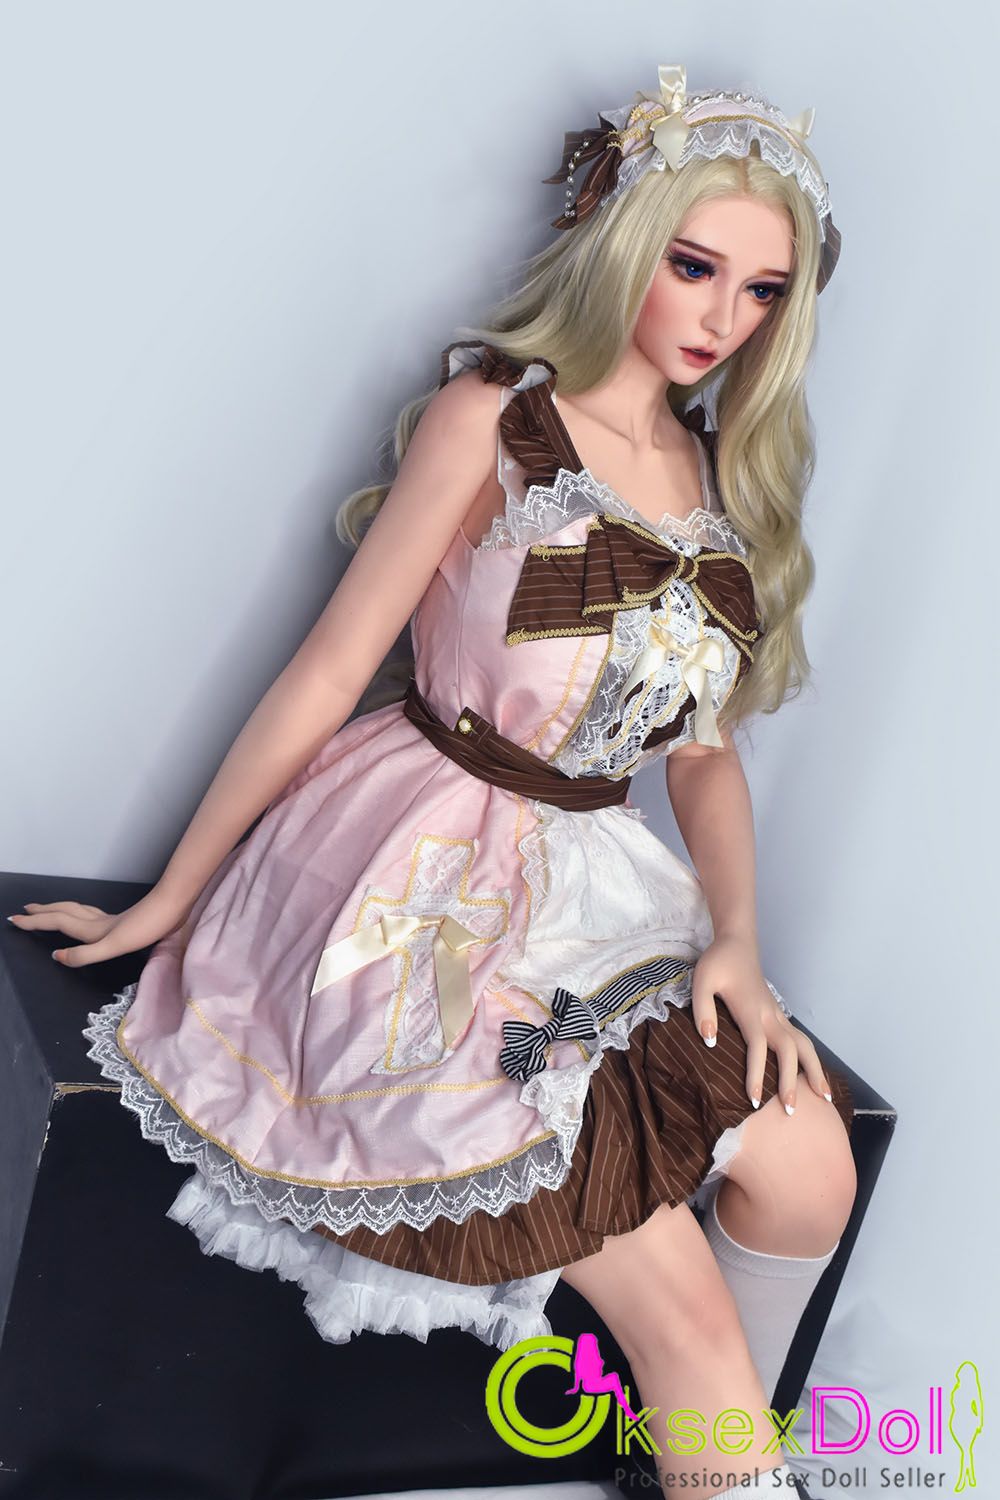 elsababe-doll.html F-cup Love Doll Pictures